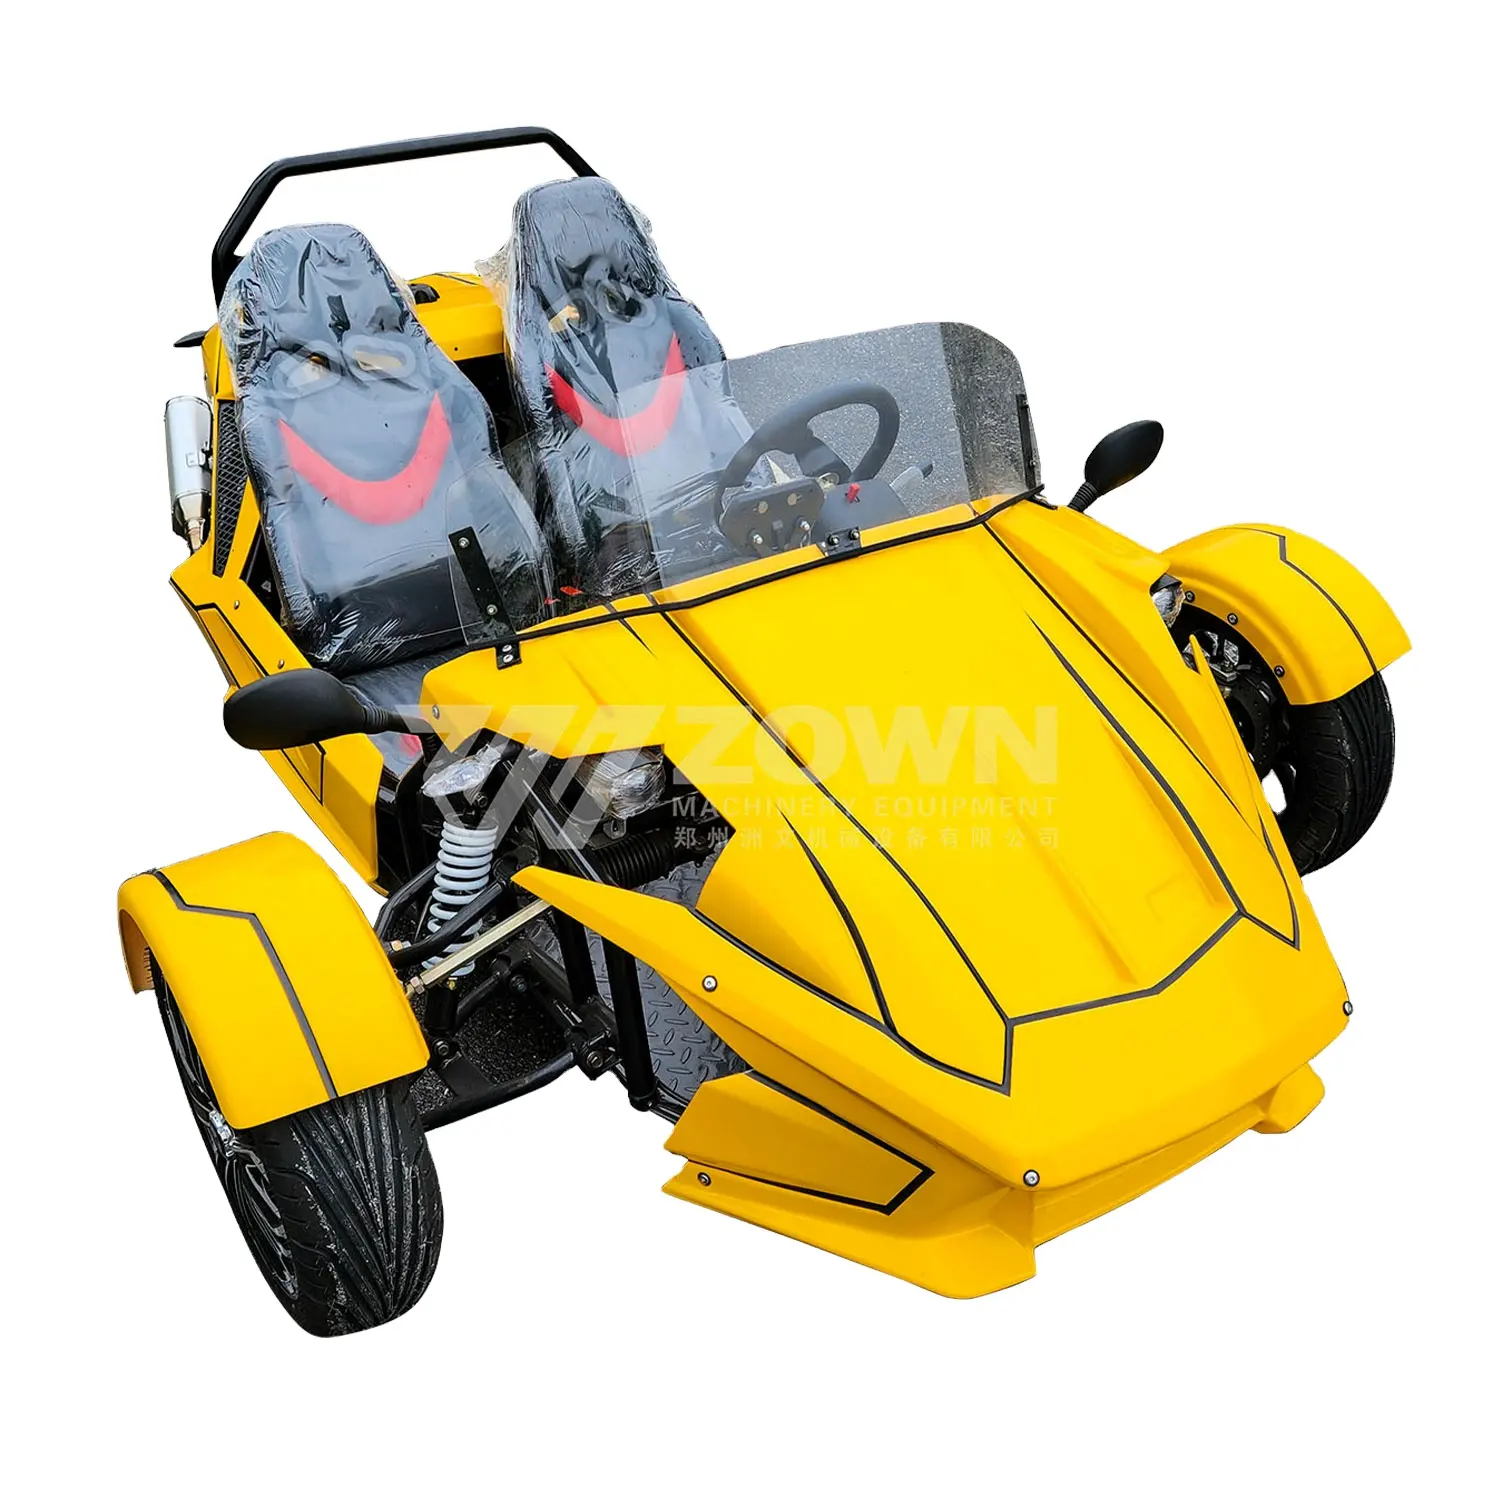 3 wheel electric car 4x4 utility vehicle china dune buggy for adults cheap utv off-road